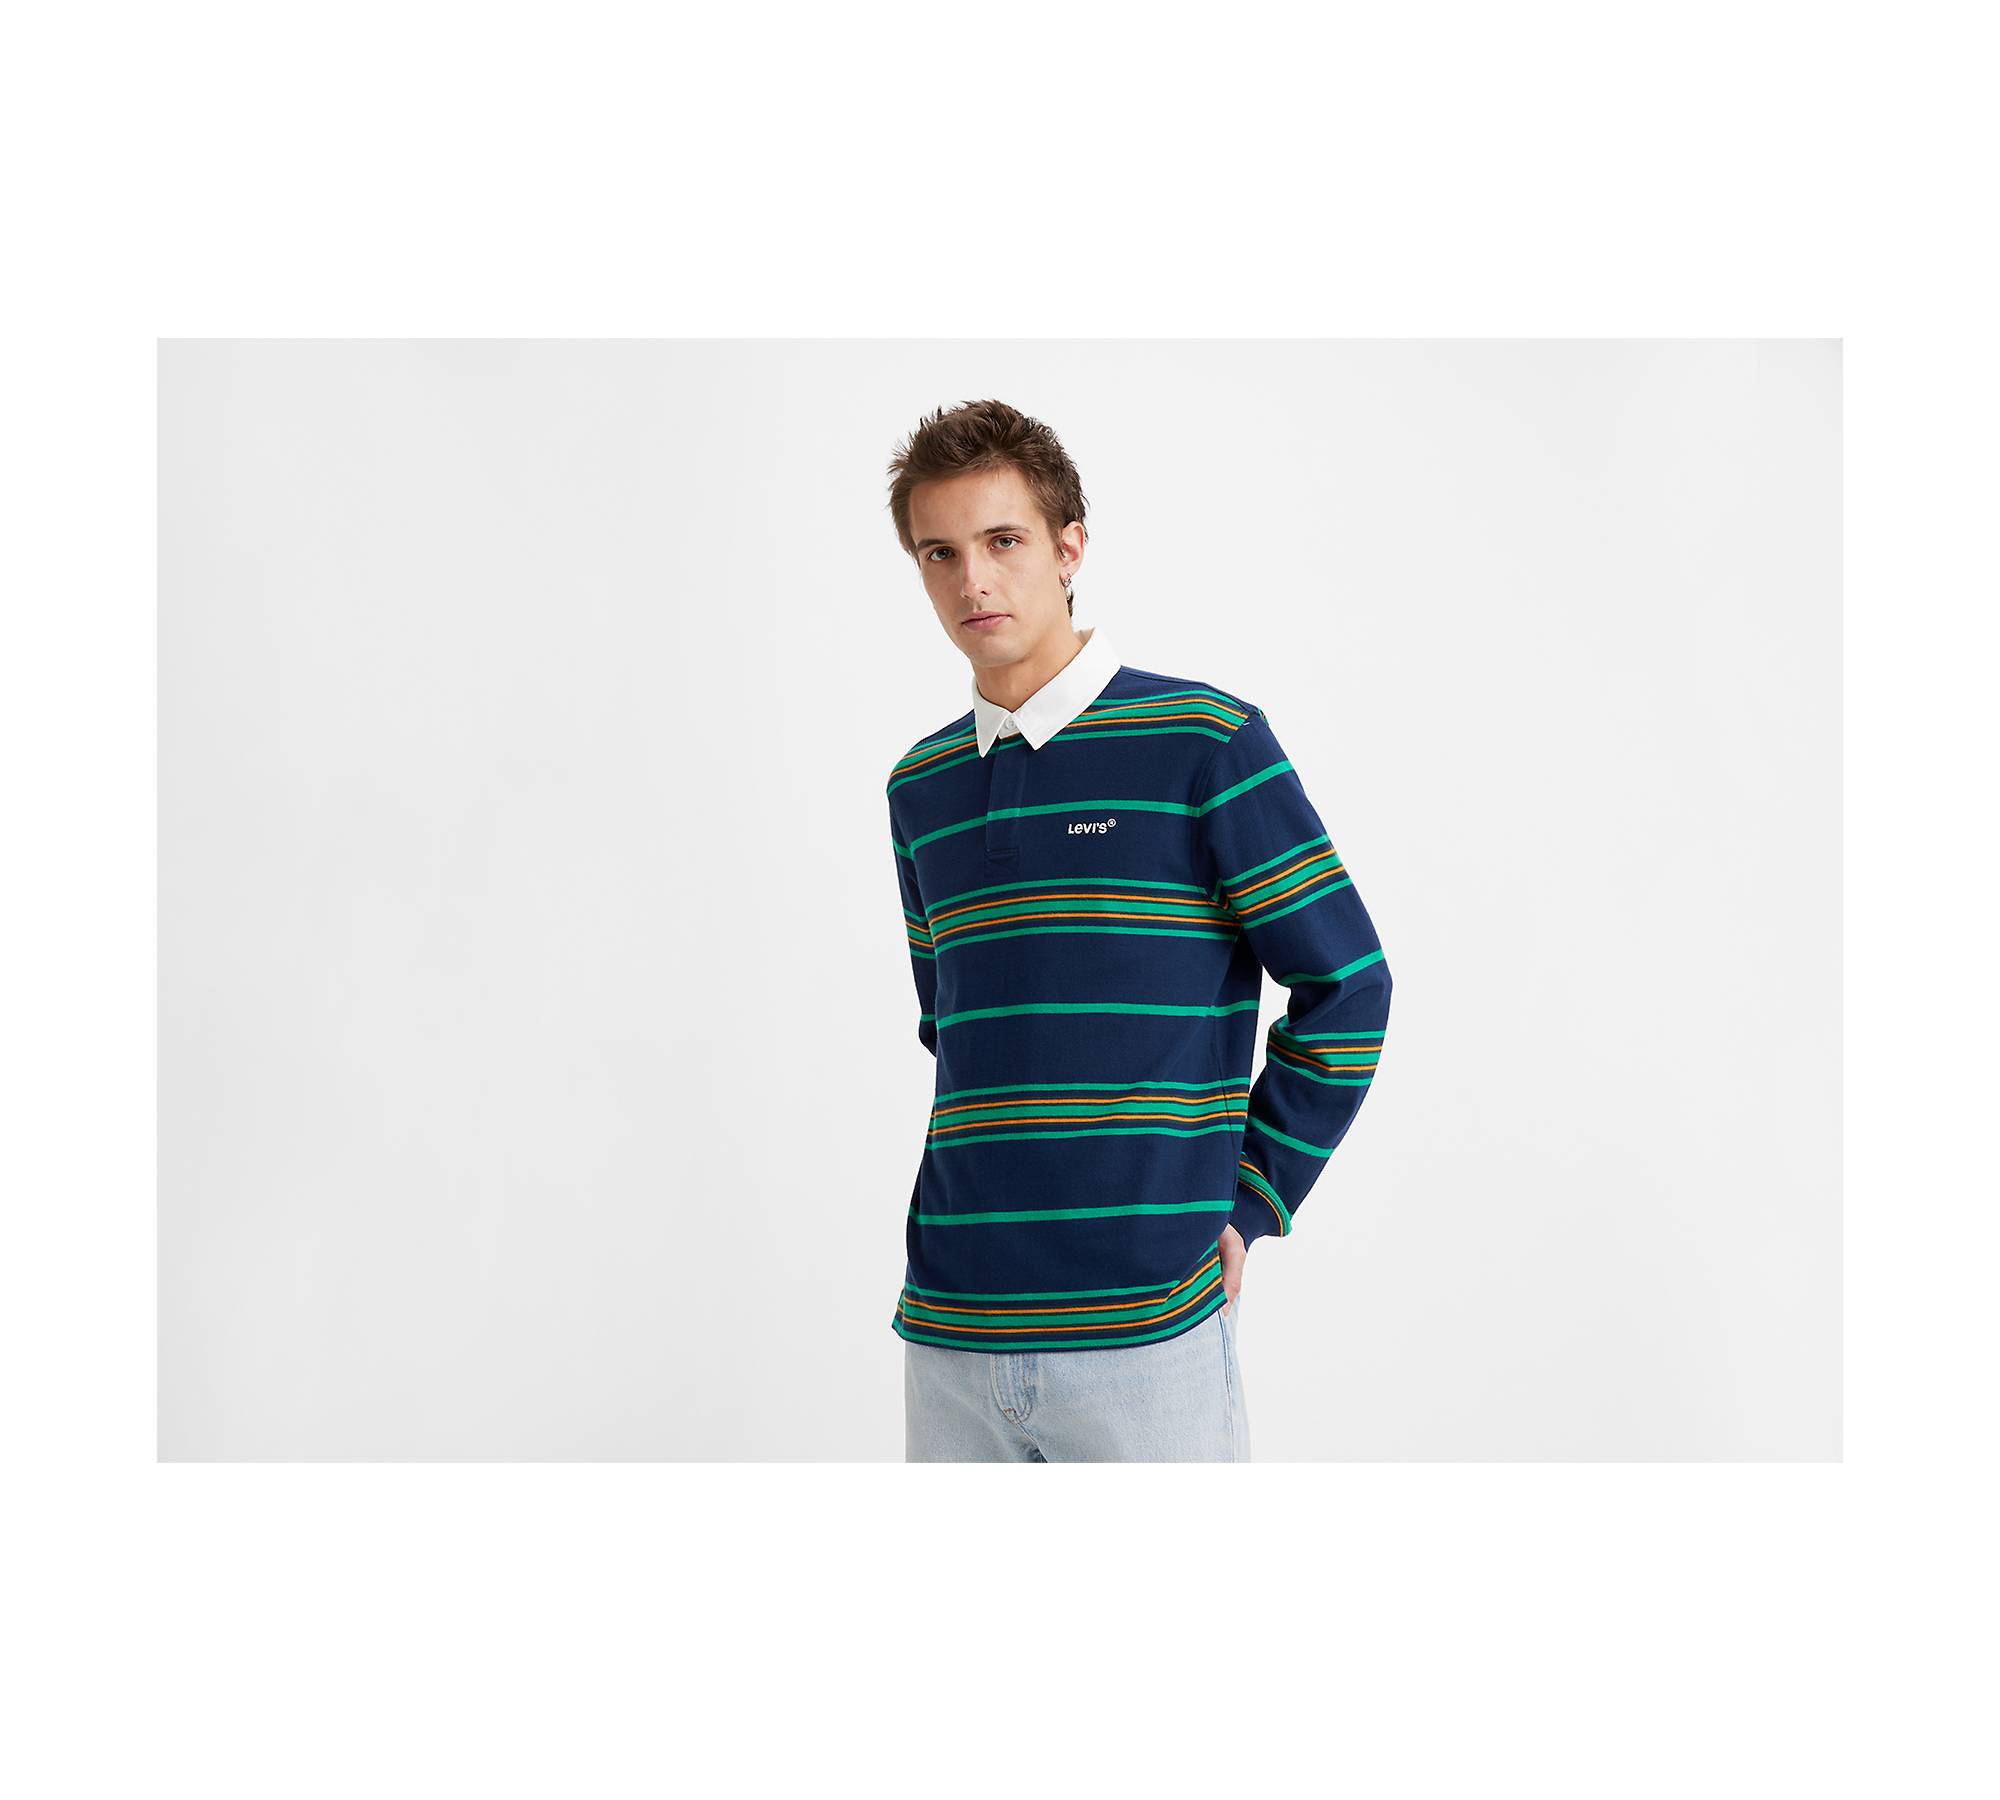 Union Rugby Polo Shirt - Multi-color | Levi's® US